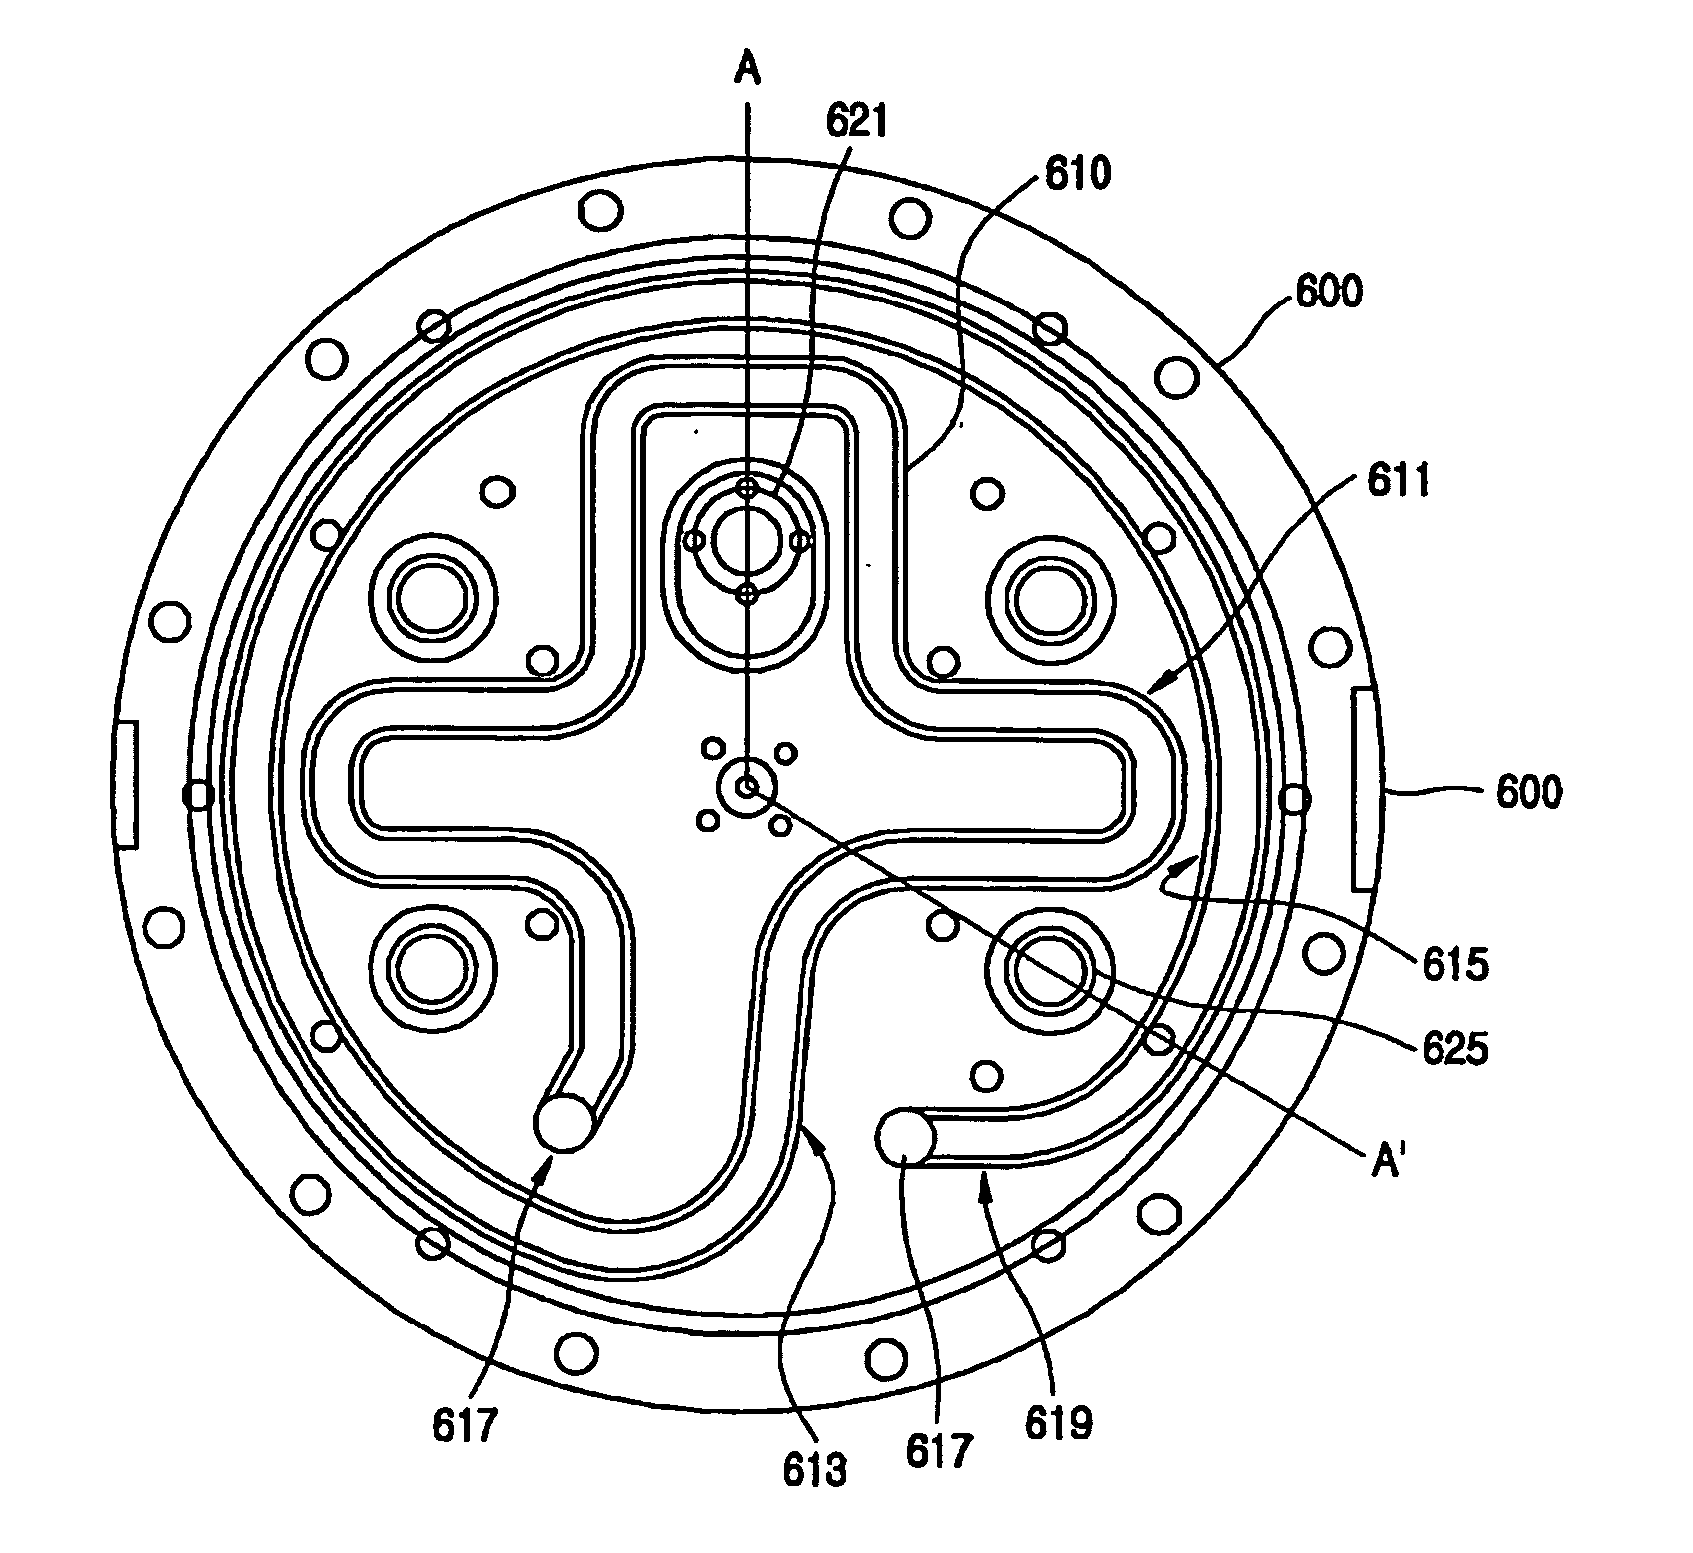 Electrostatic Chuck And Chuck Base Having Cooling Path For Cooling Wafer